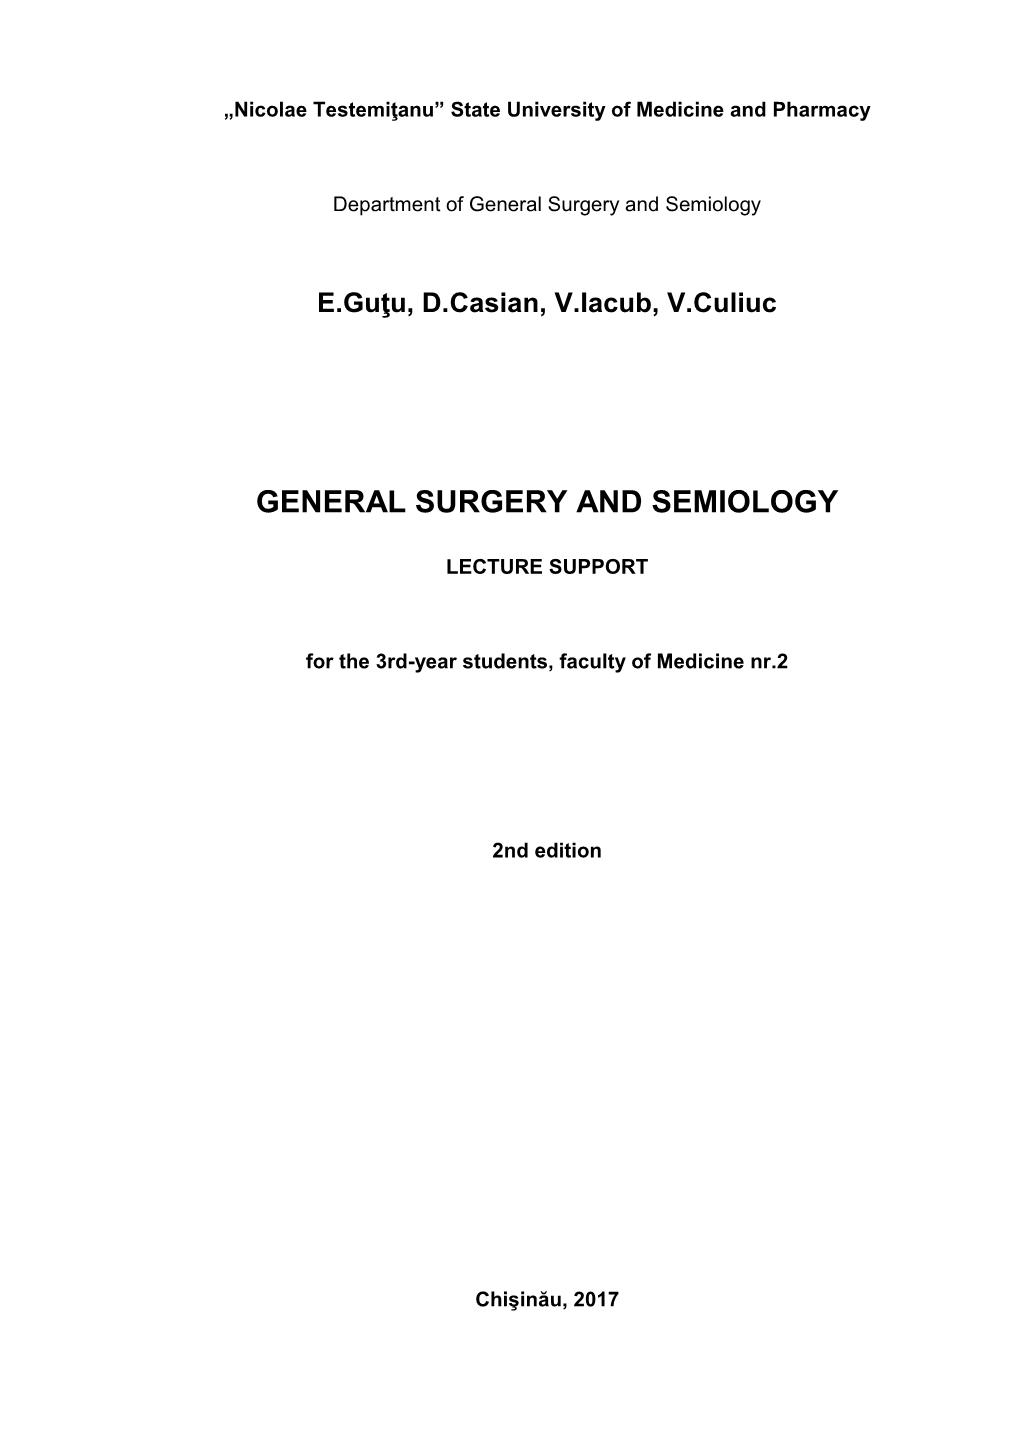 General Surgery and Semiology